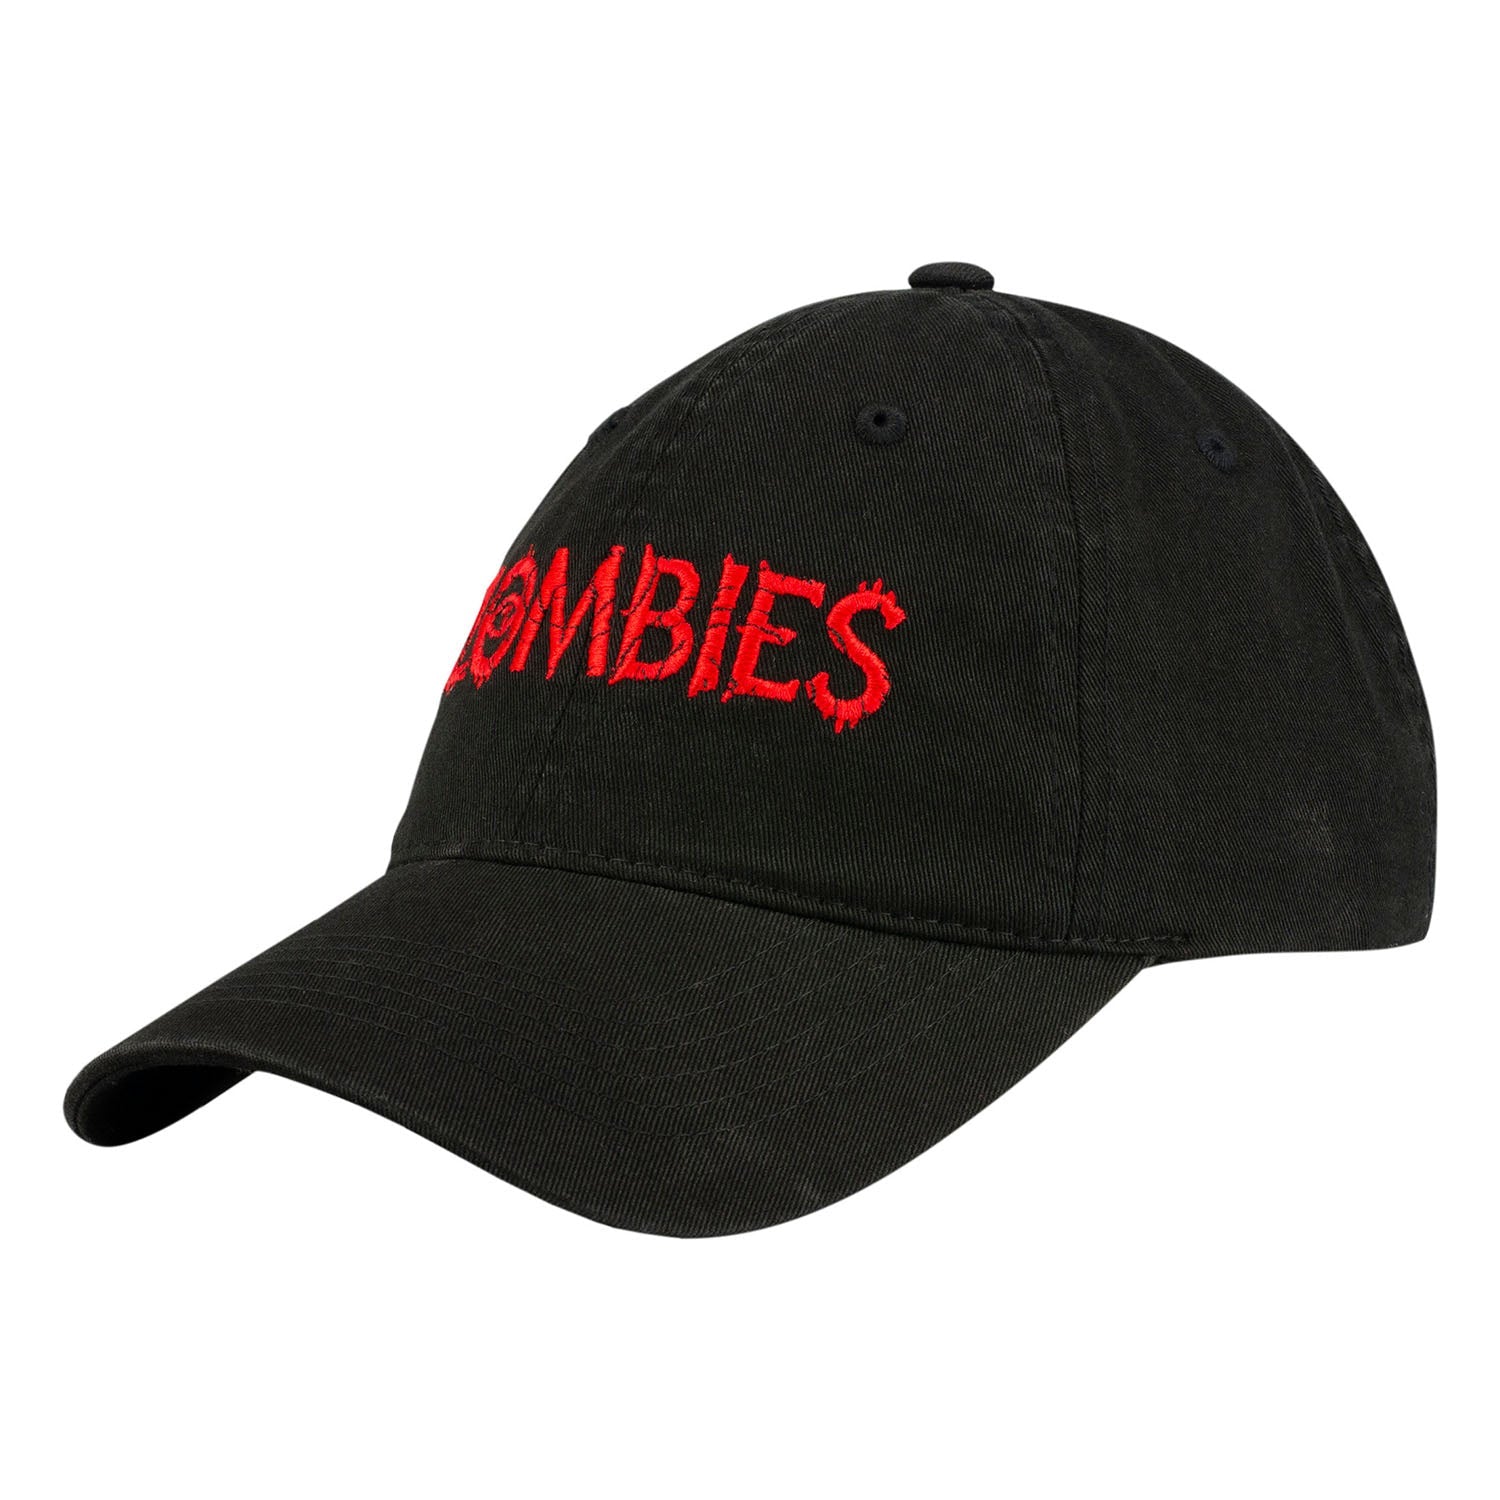 Call of Duty Black Zombies Logo Hat - Left View